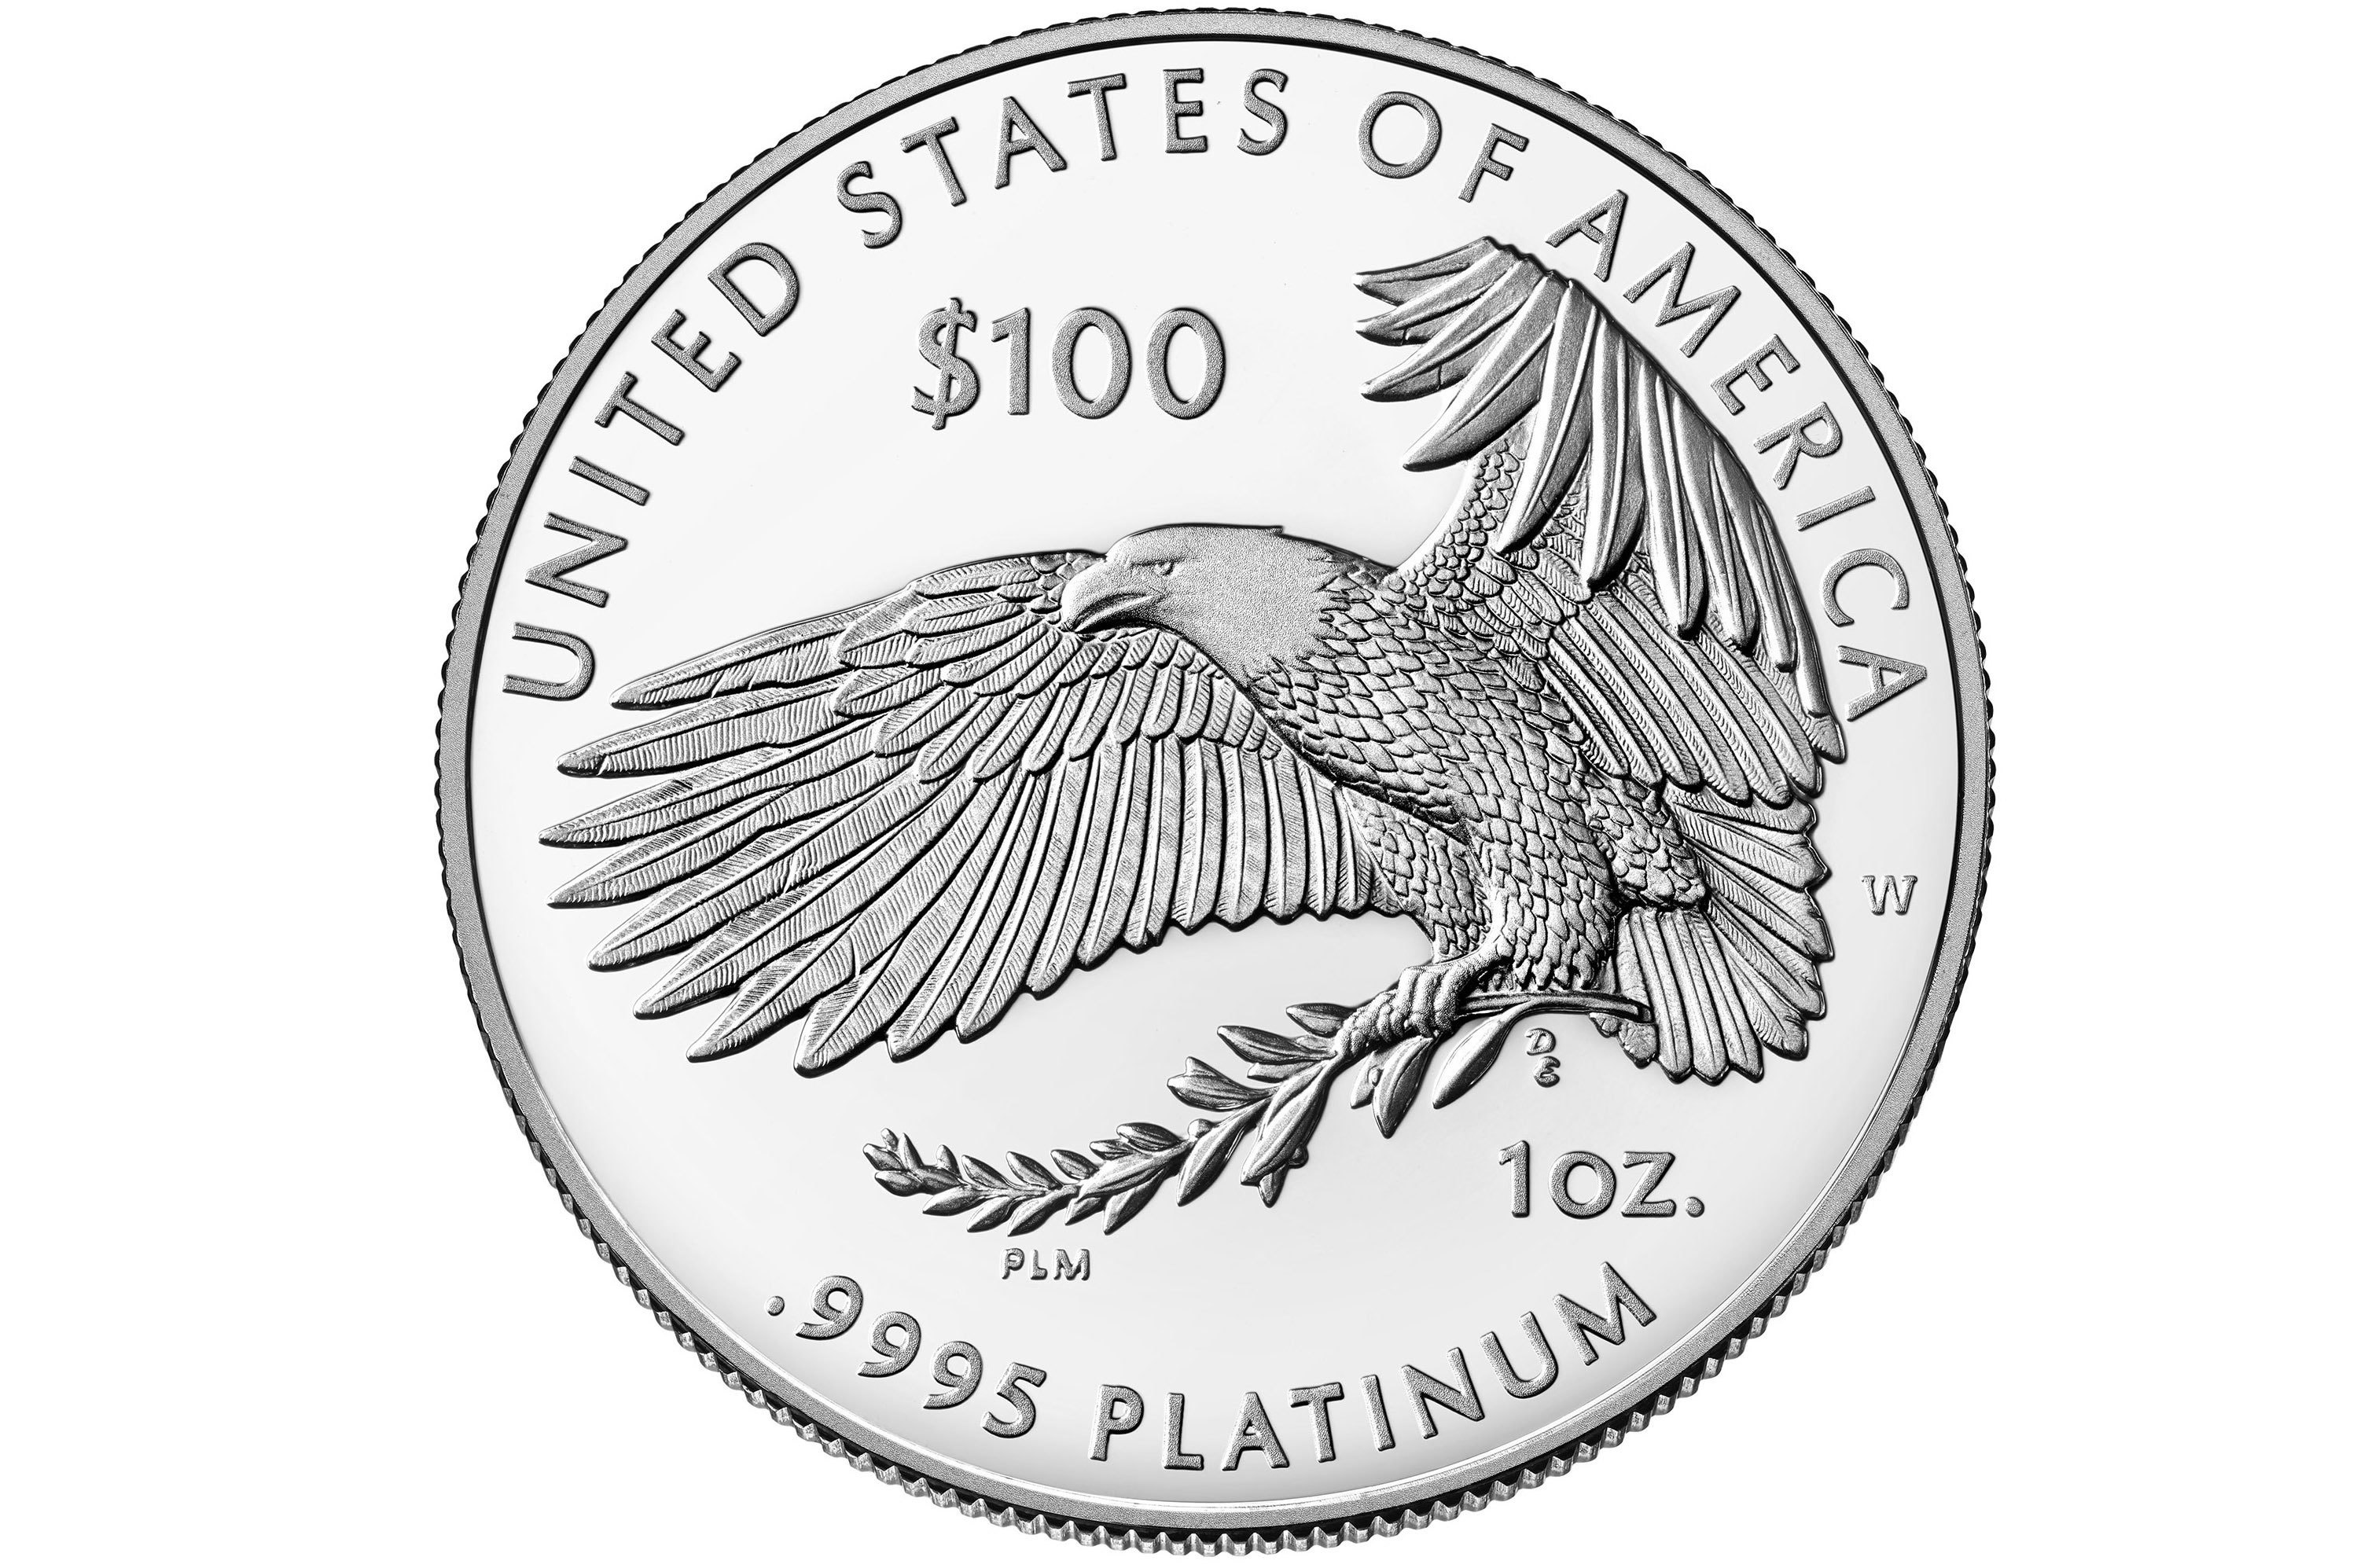 A $100 platinum coin. The idea was to mint one worth a trillion dollars.